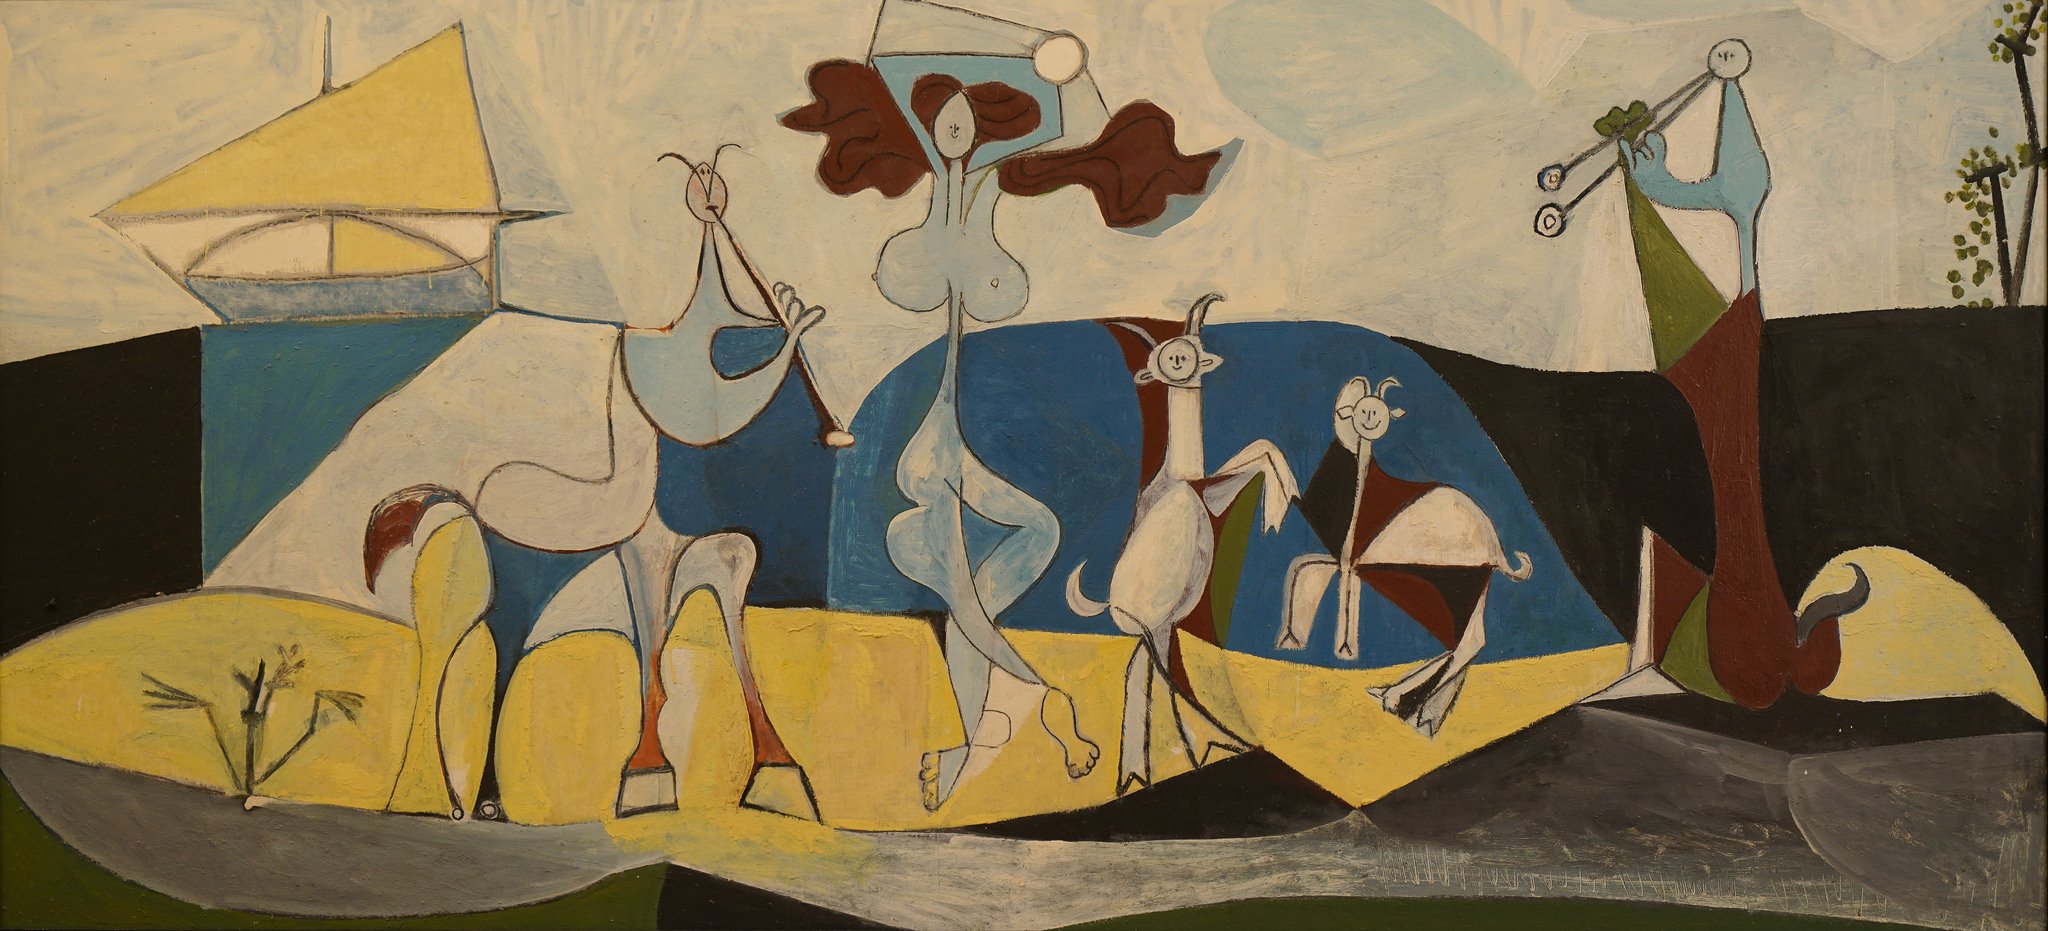 Picasso Paintings, Sculptures, Prints & More - iTravelWithArt